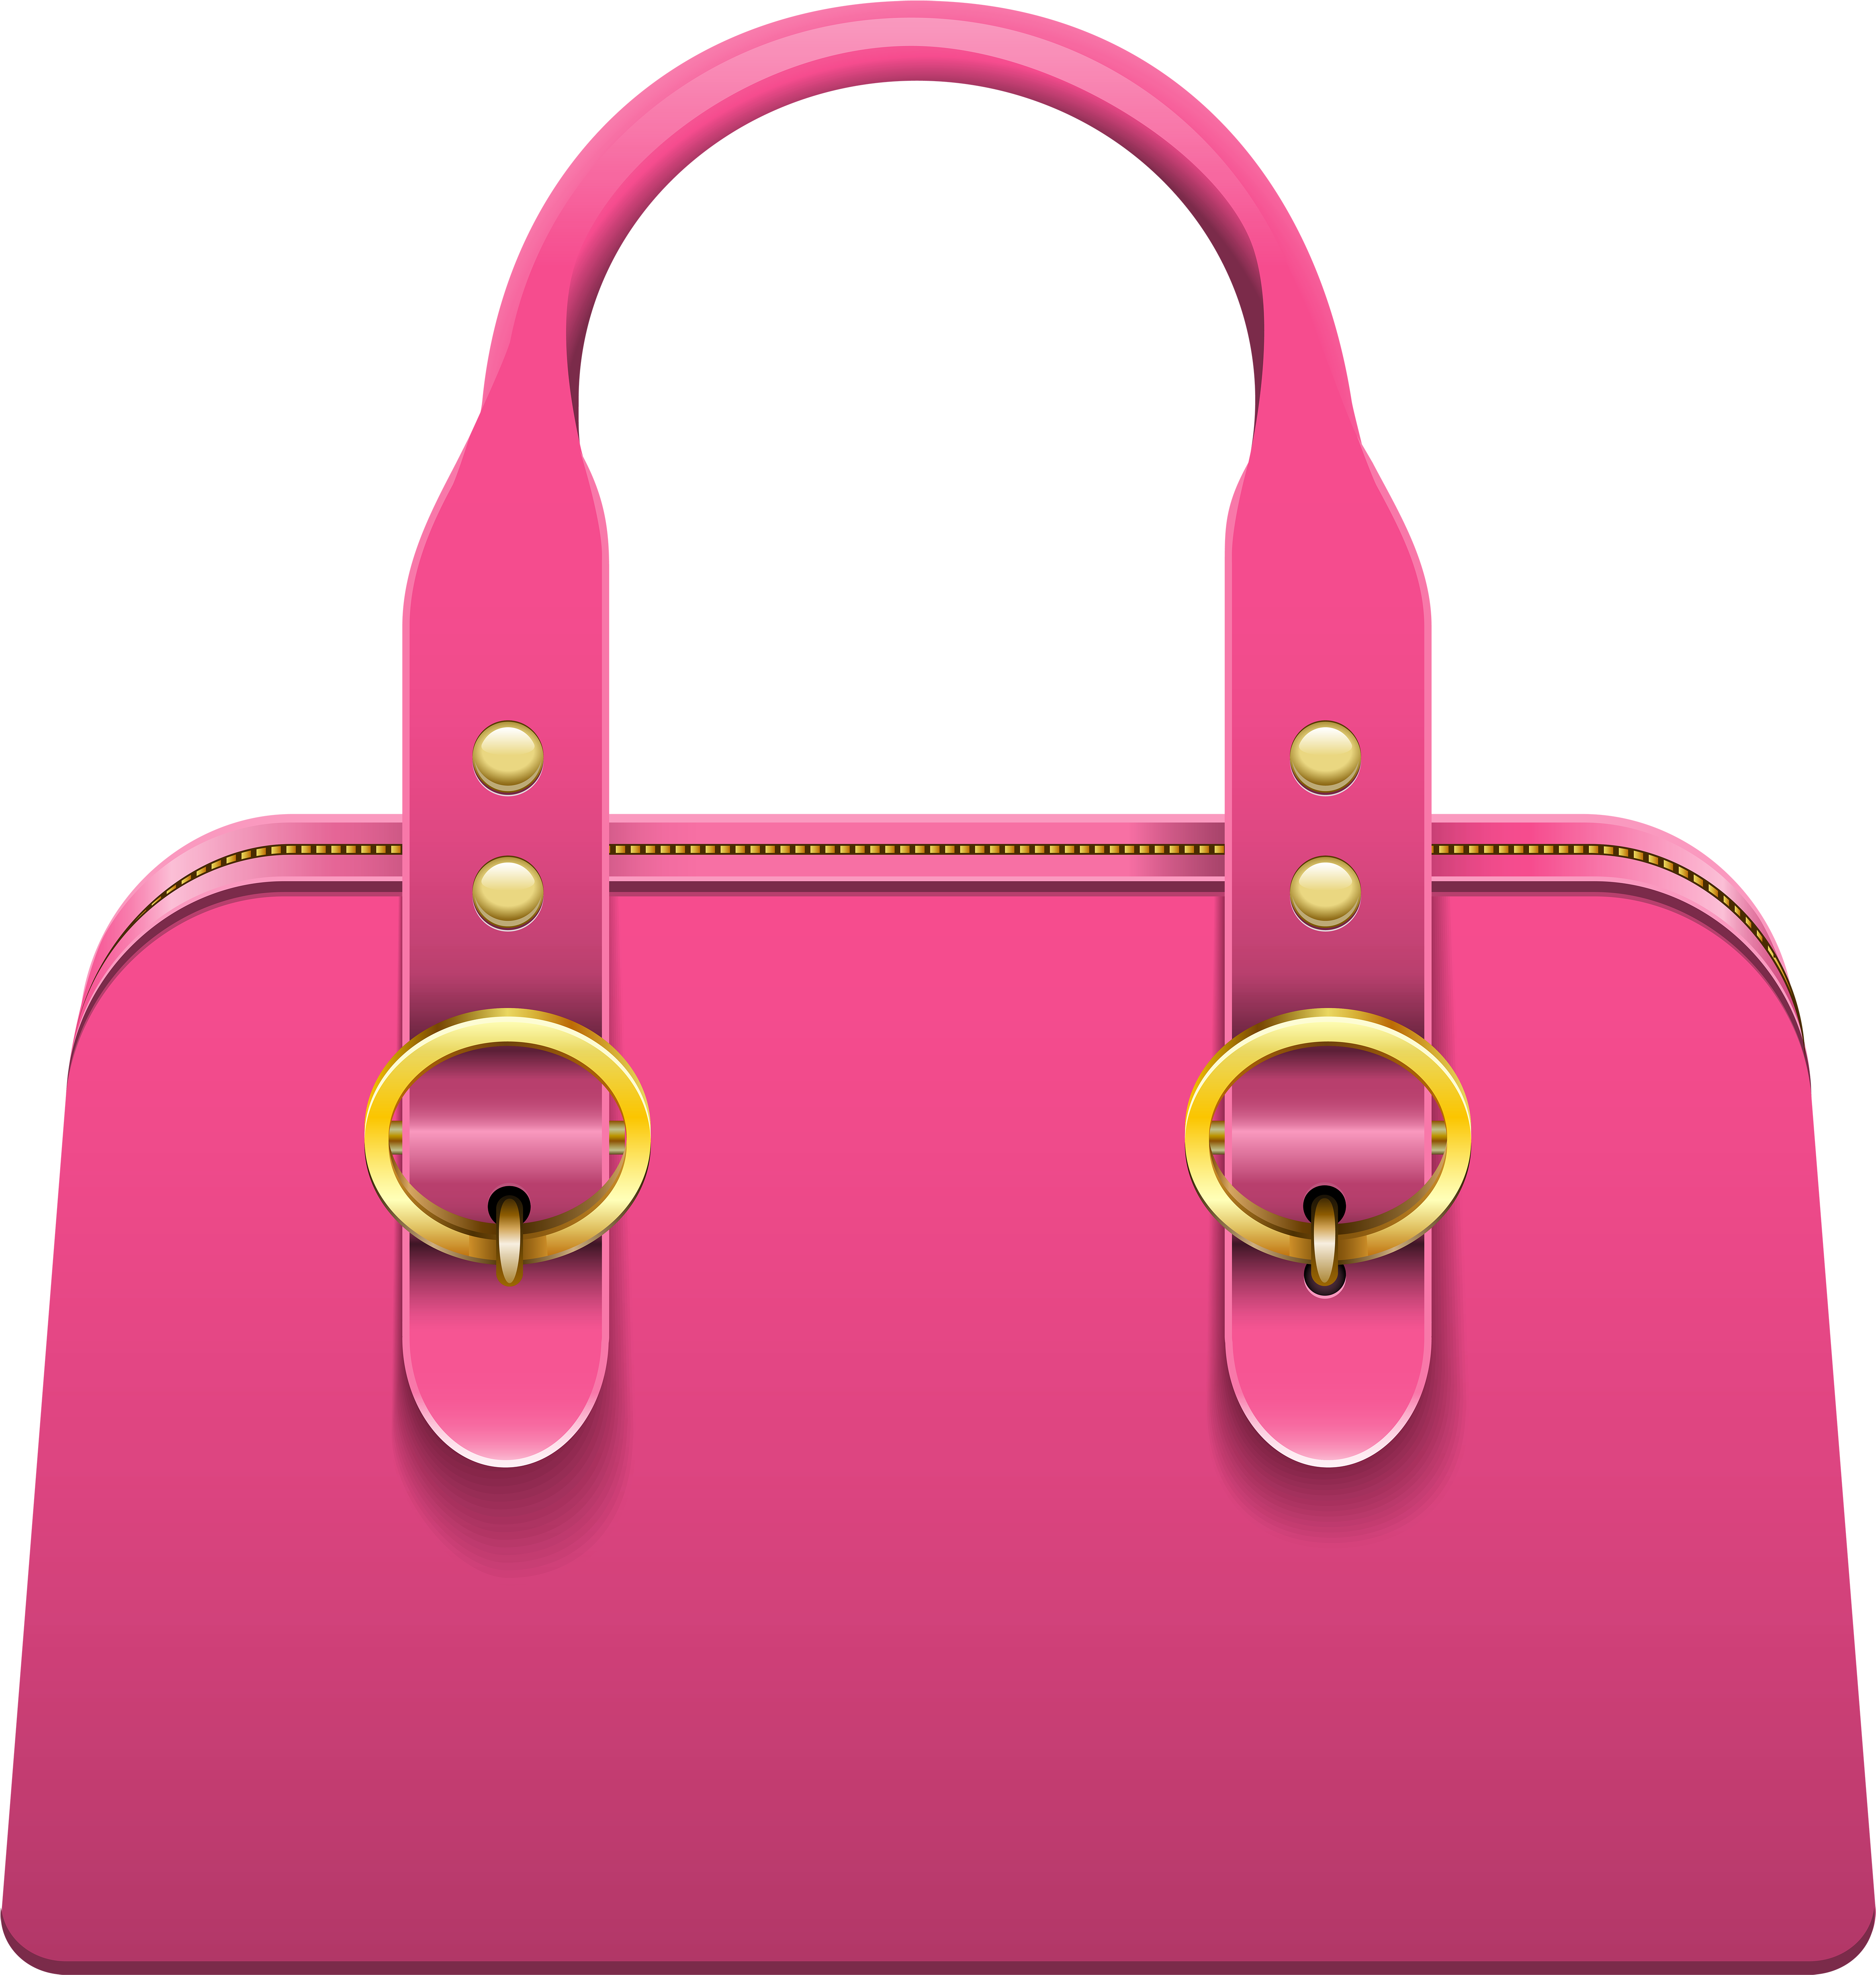 A Pink Purse With Gold Rings